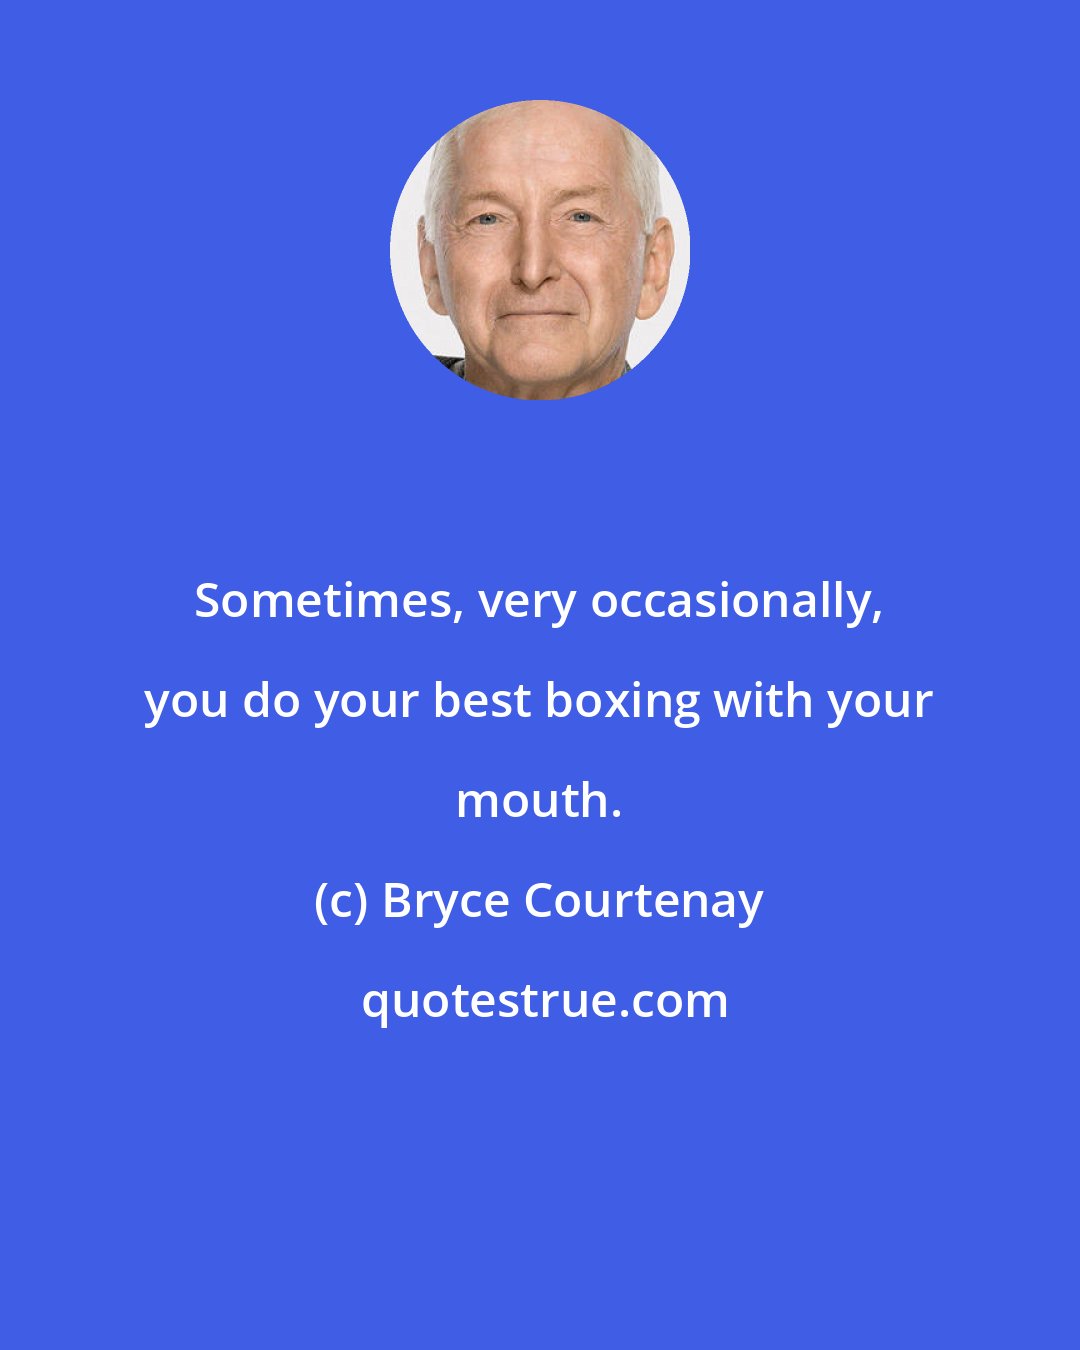 Bryce Courtenay: Sometimes, very occasionally, you do your best boxing with your mouth.